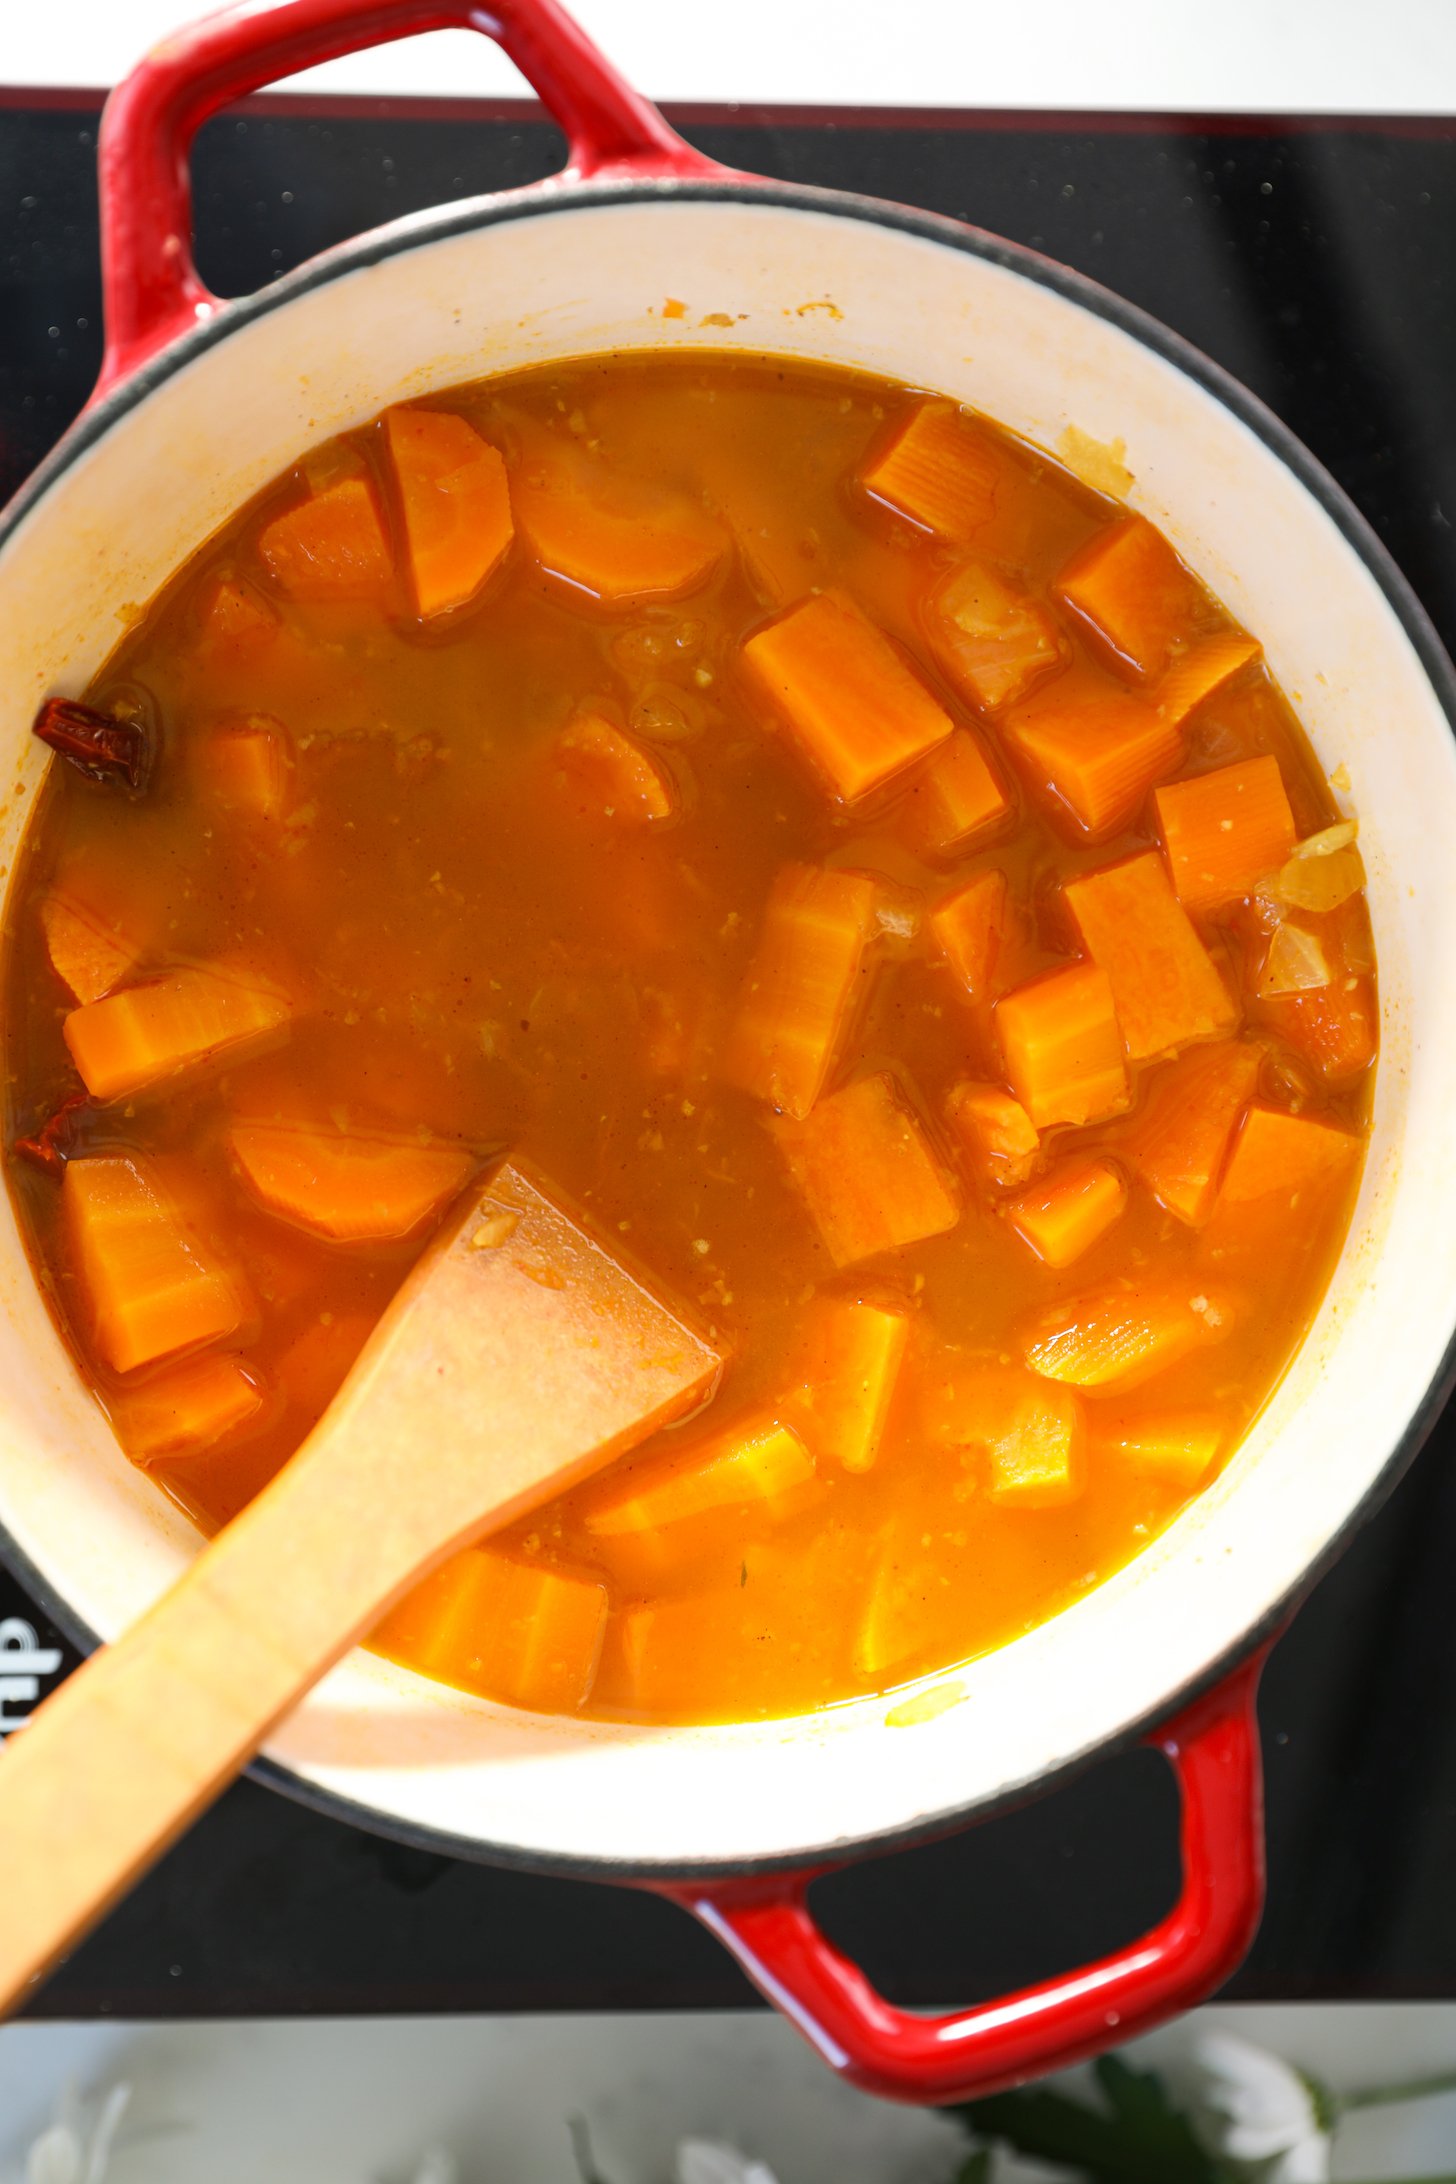 A cooking pot filled with diced sweet potato and carrot chunks in stock, with a wooden spoon submerged in it.